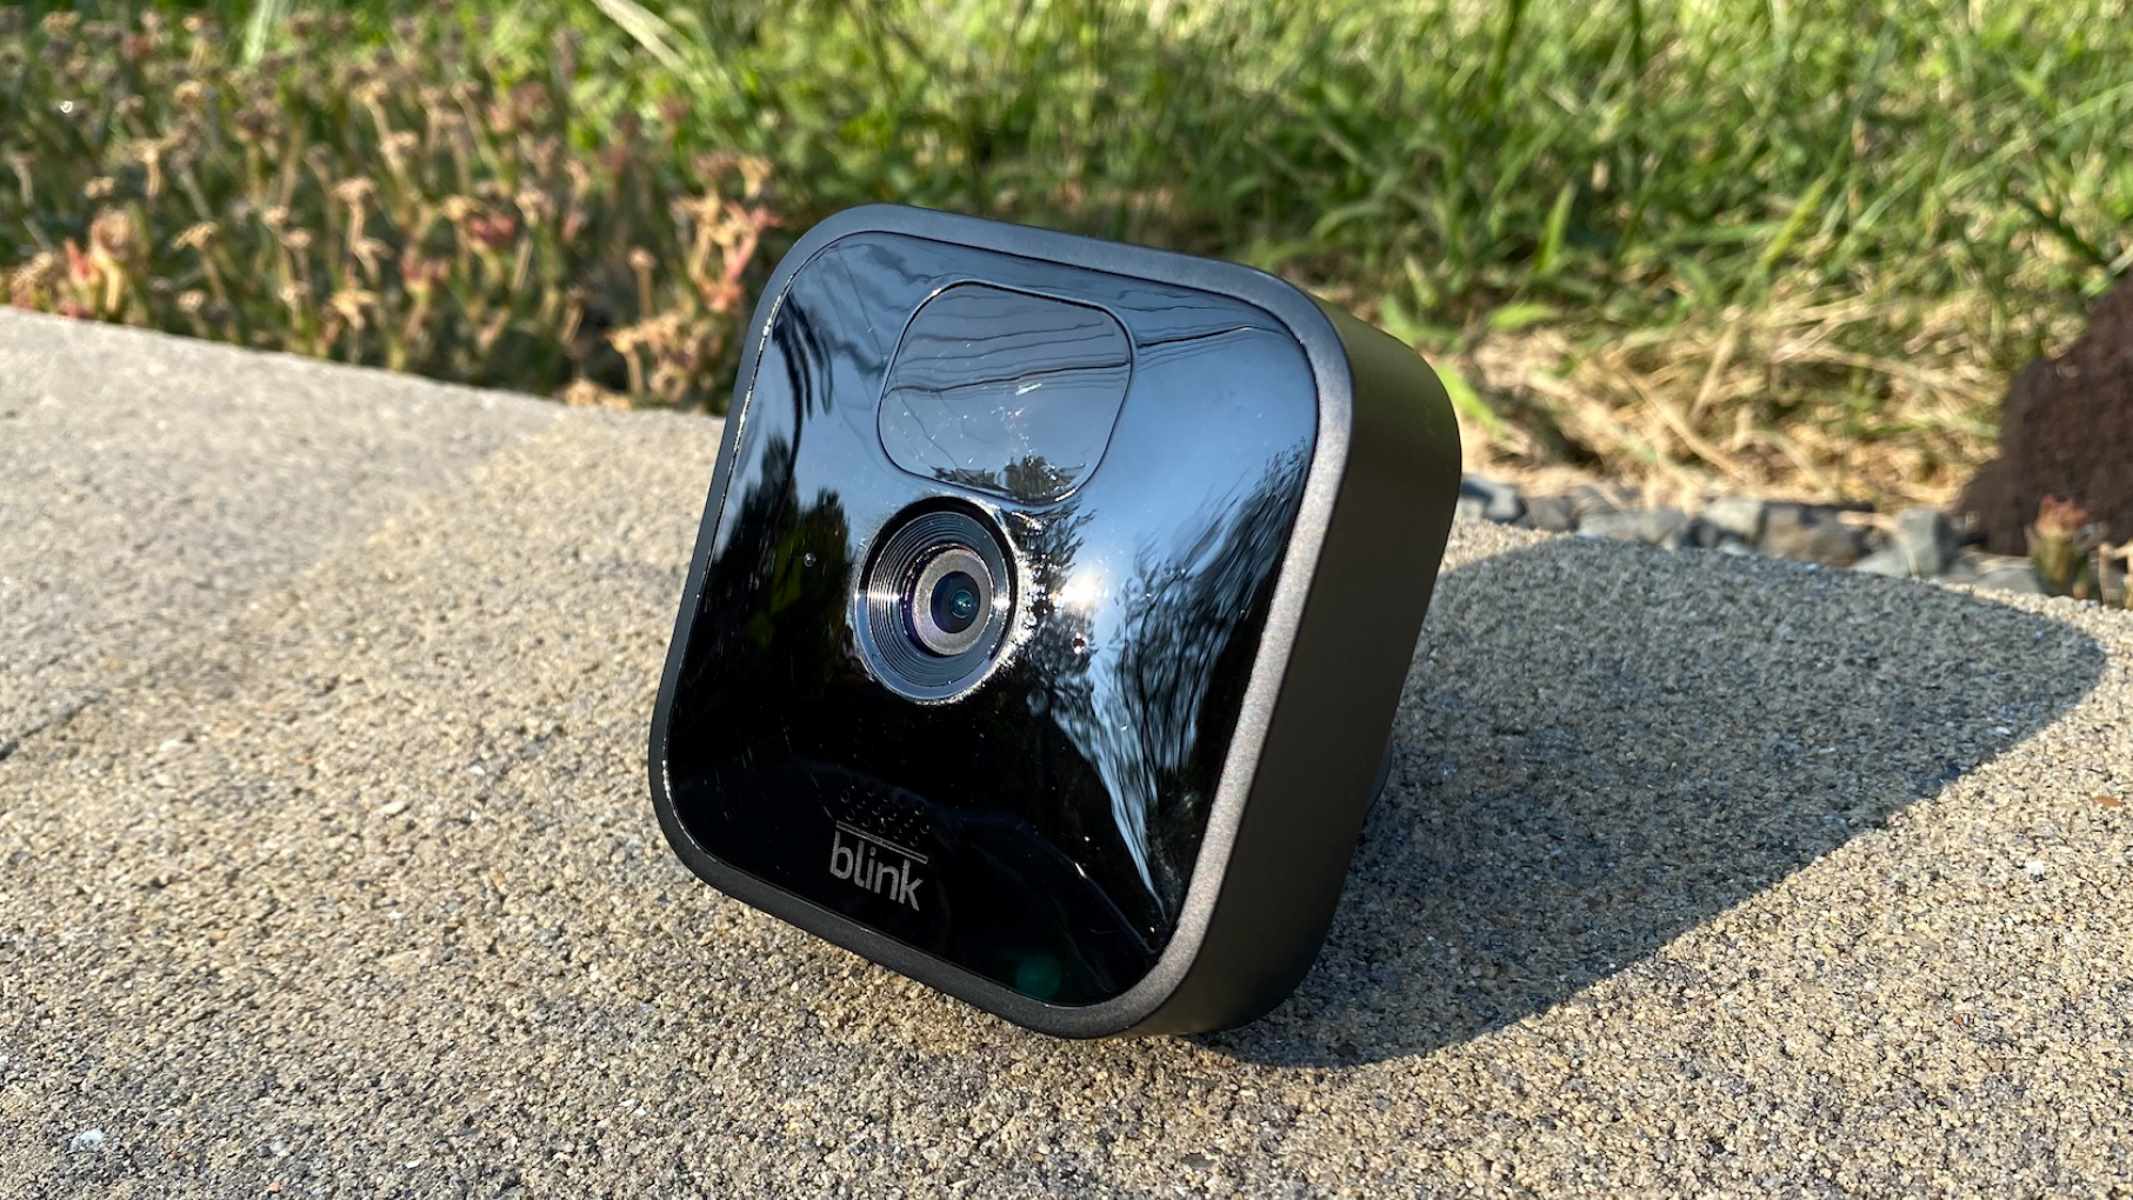 How To Set Up Blink Outdoor Camera 